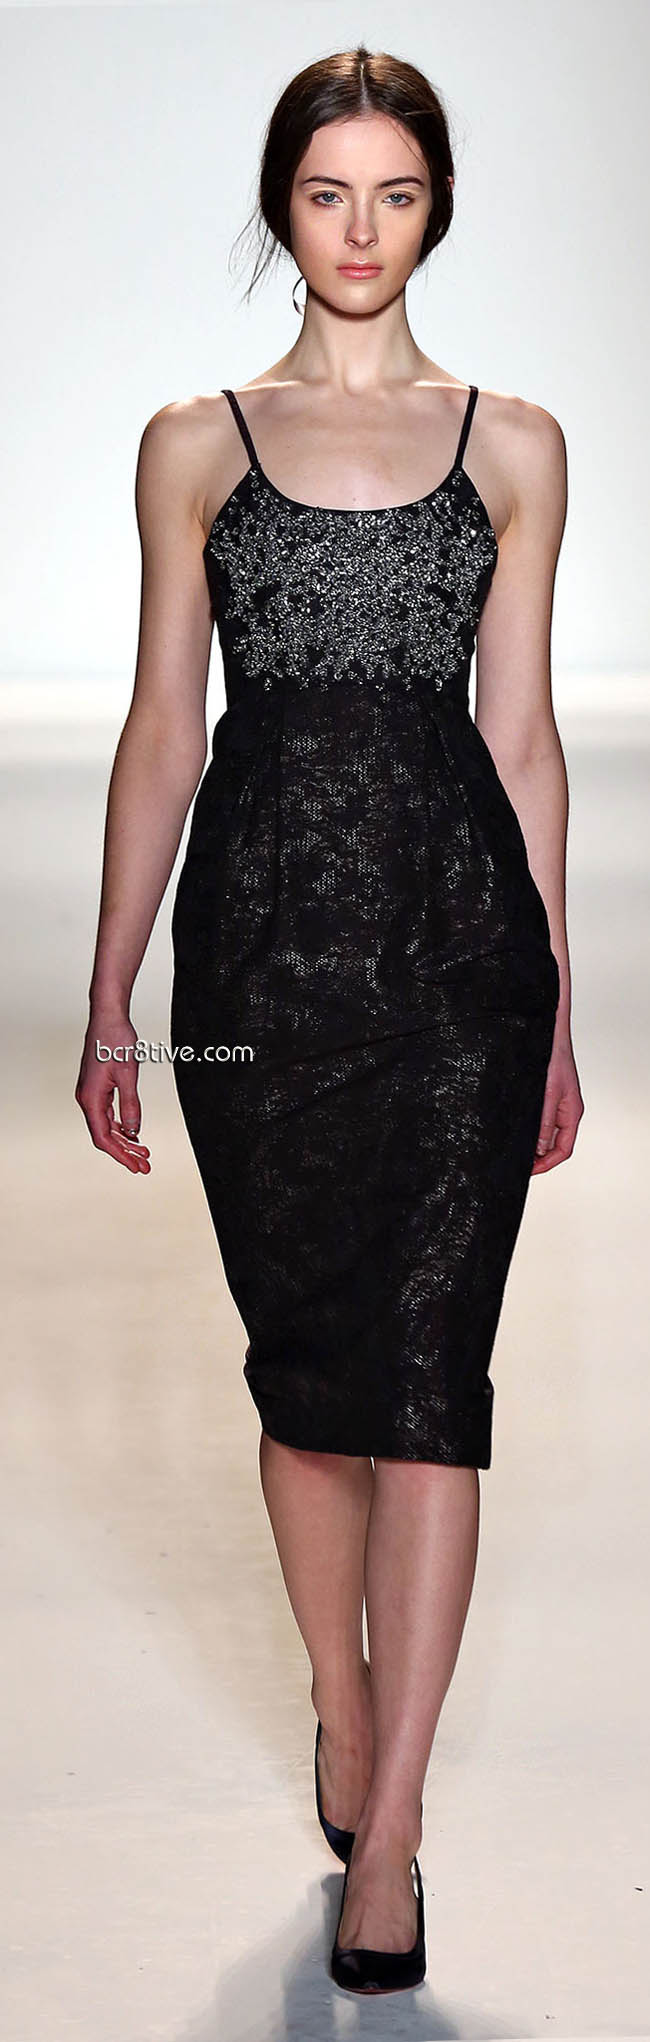 Jenny Packham Fall 2013 Ready to Wear Collection at New York Fashion Week